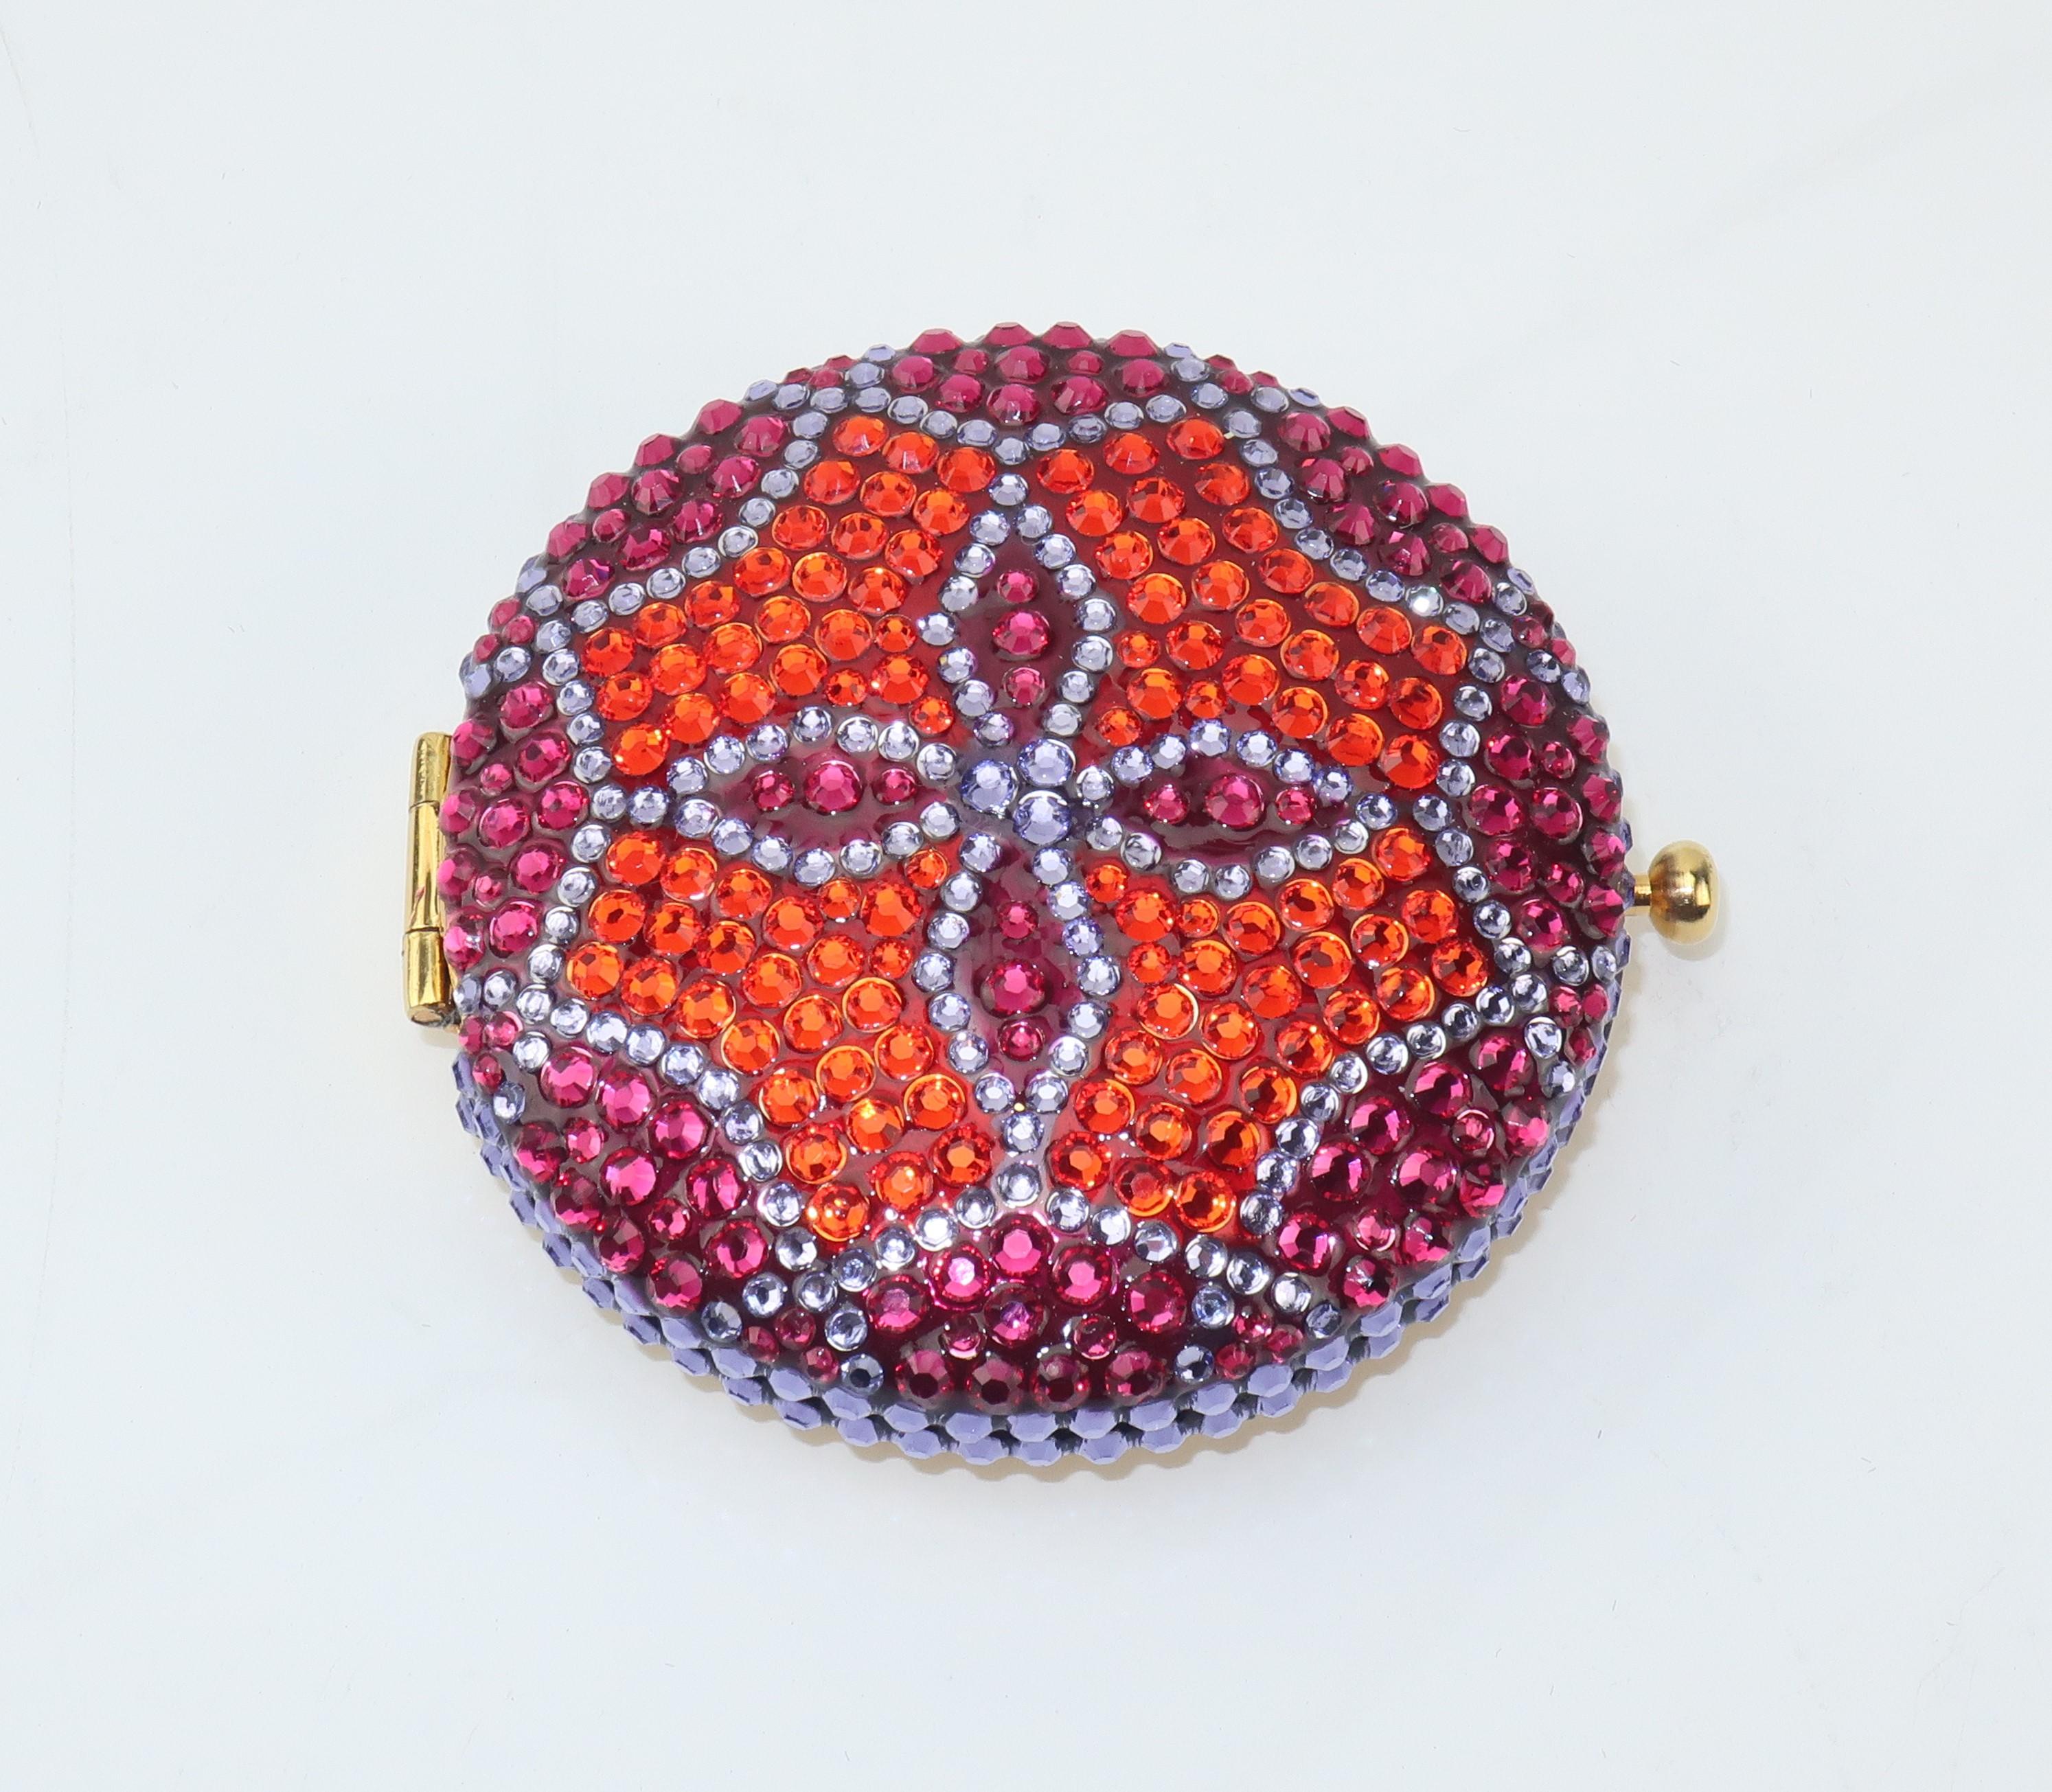 A collectible powder compact by handbag designer Kathrine Baumann for Estee Lauder with a pave crystal snowflake design in shades of red, magenta and lilac all set in a jewelry quality gold tone metal.  The push button closure opens to reveal a